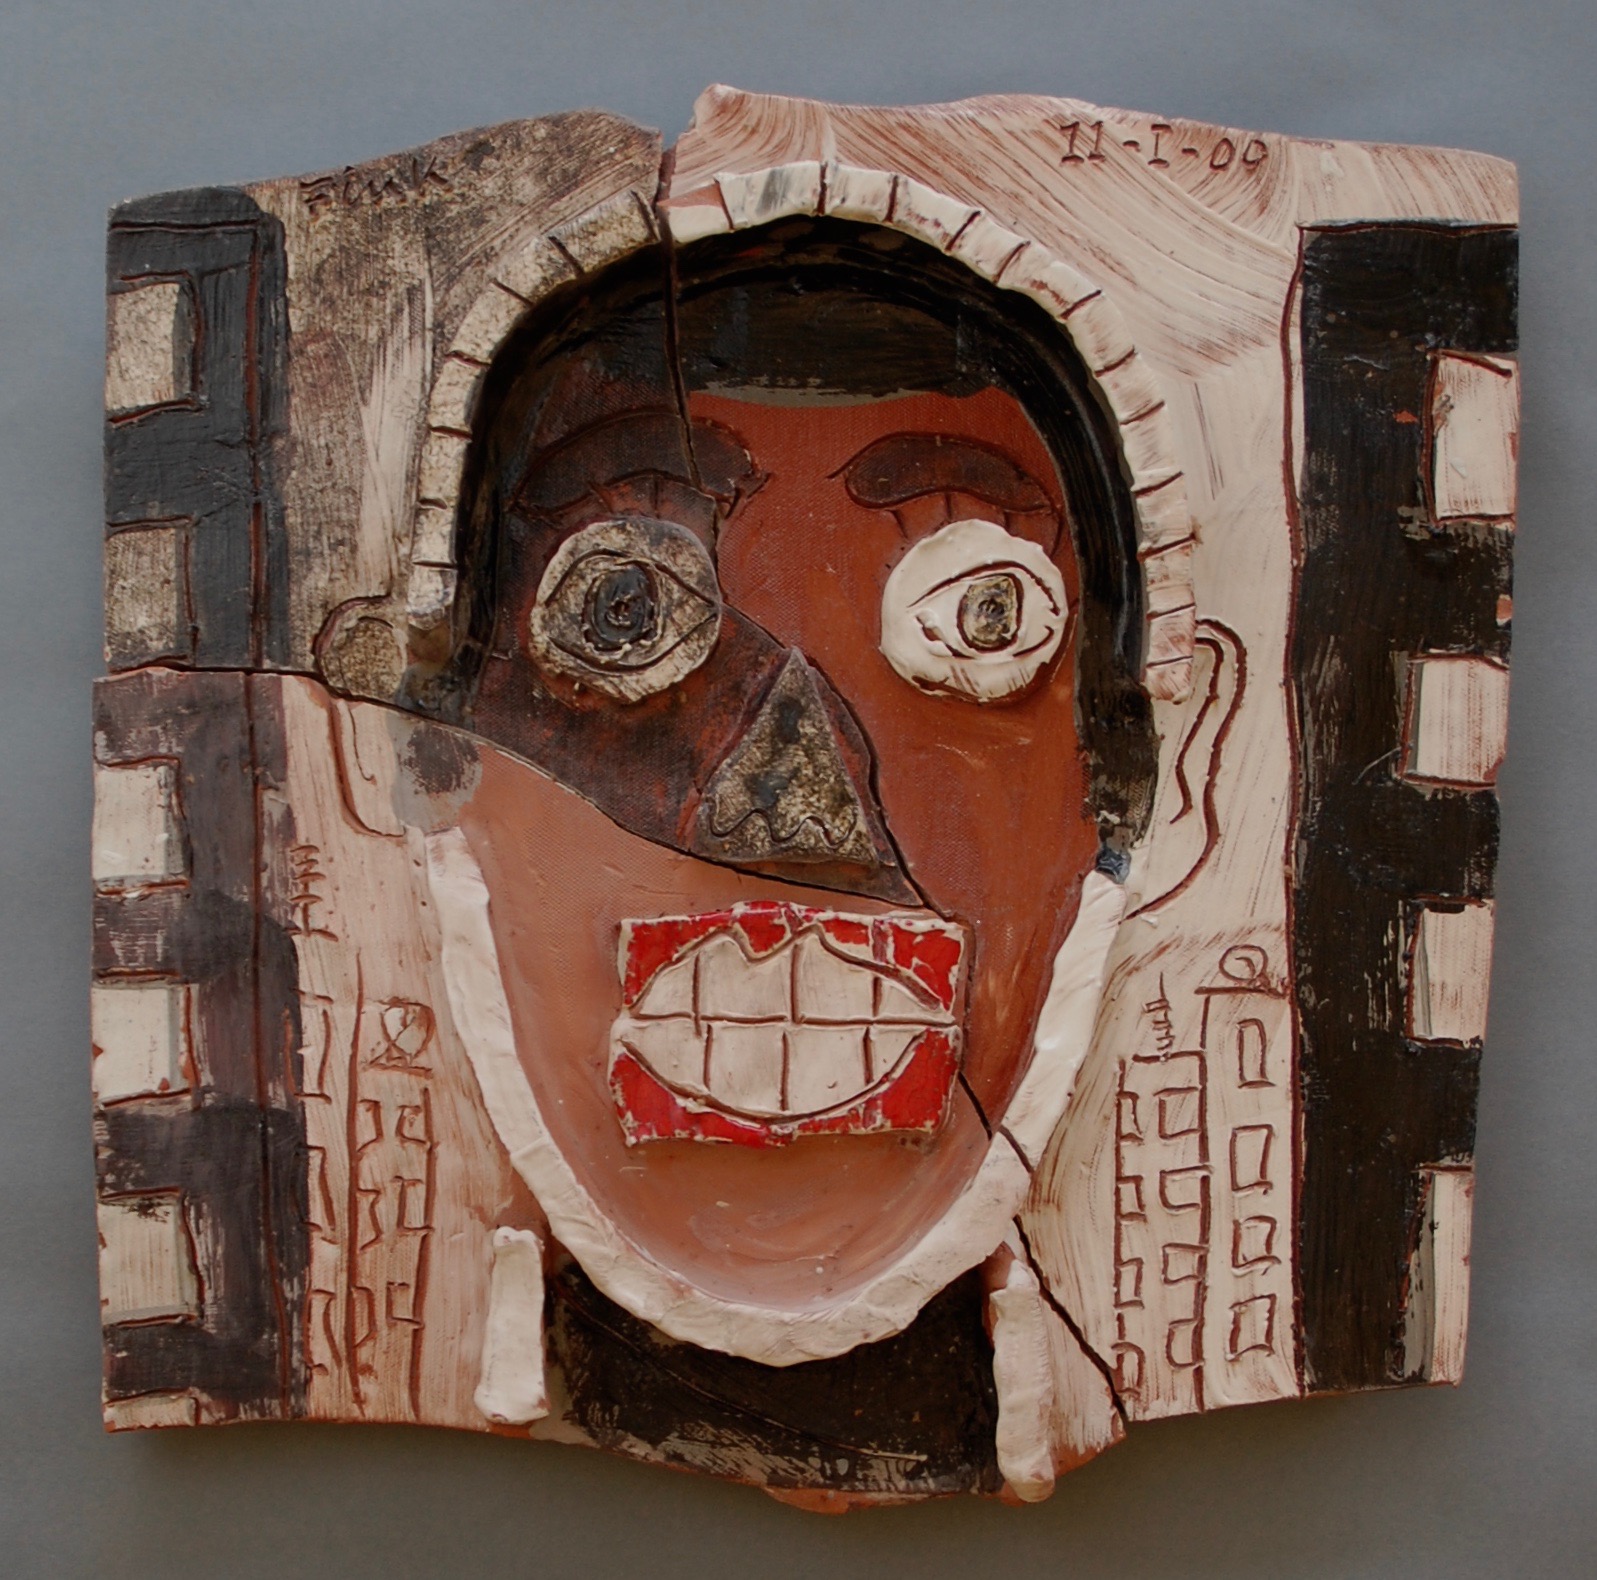 Fragmented head of a man, 1999